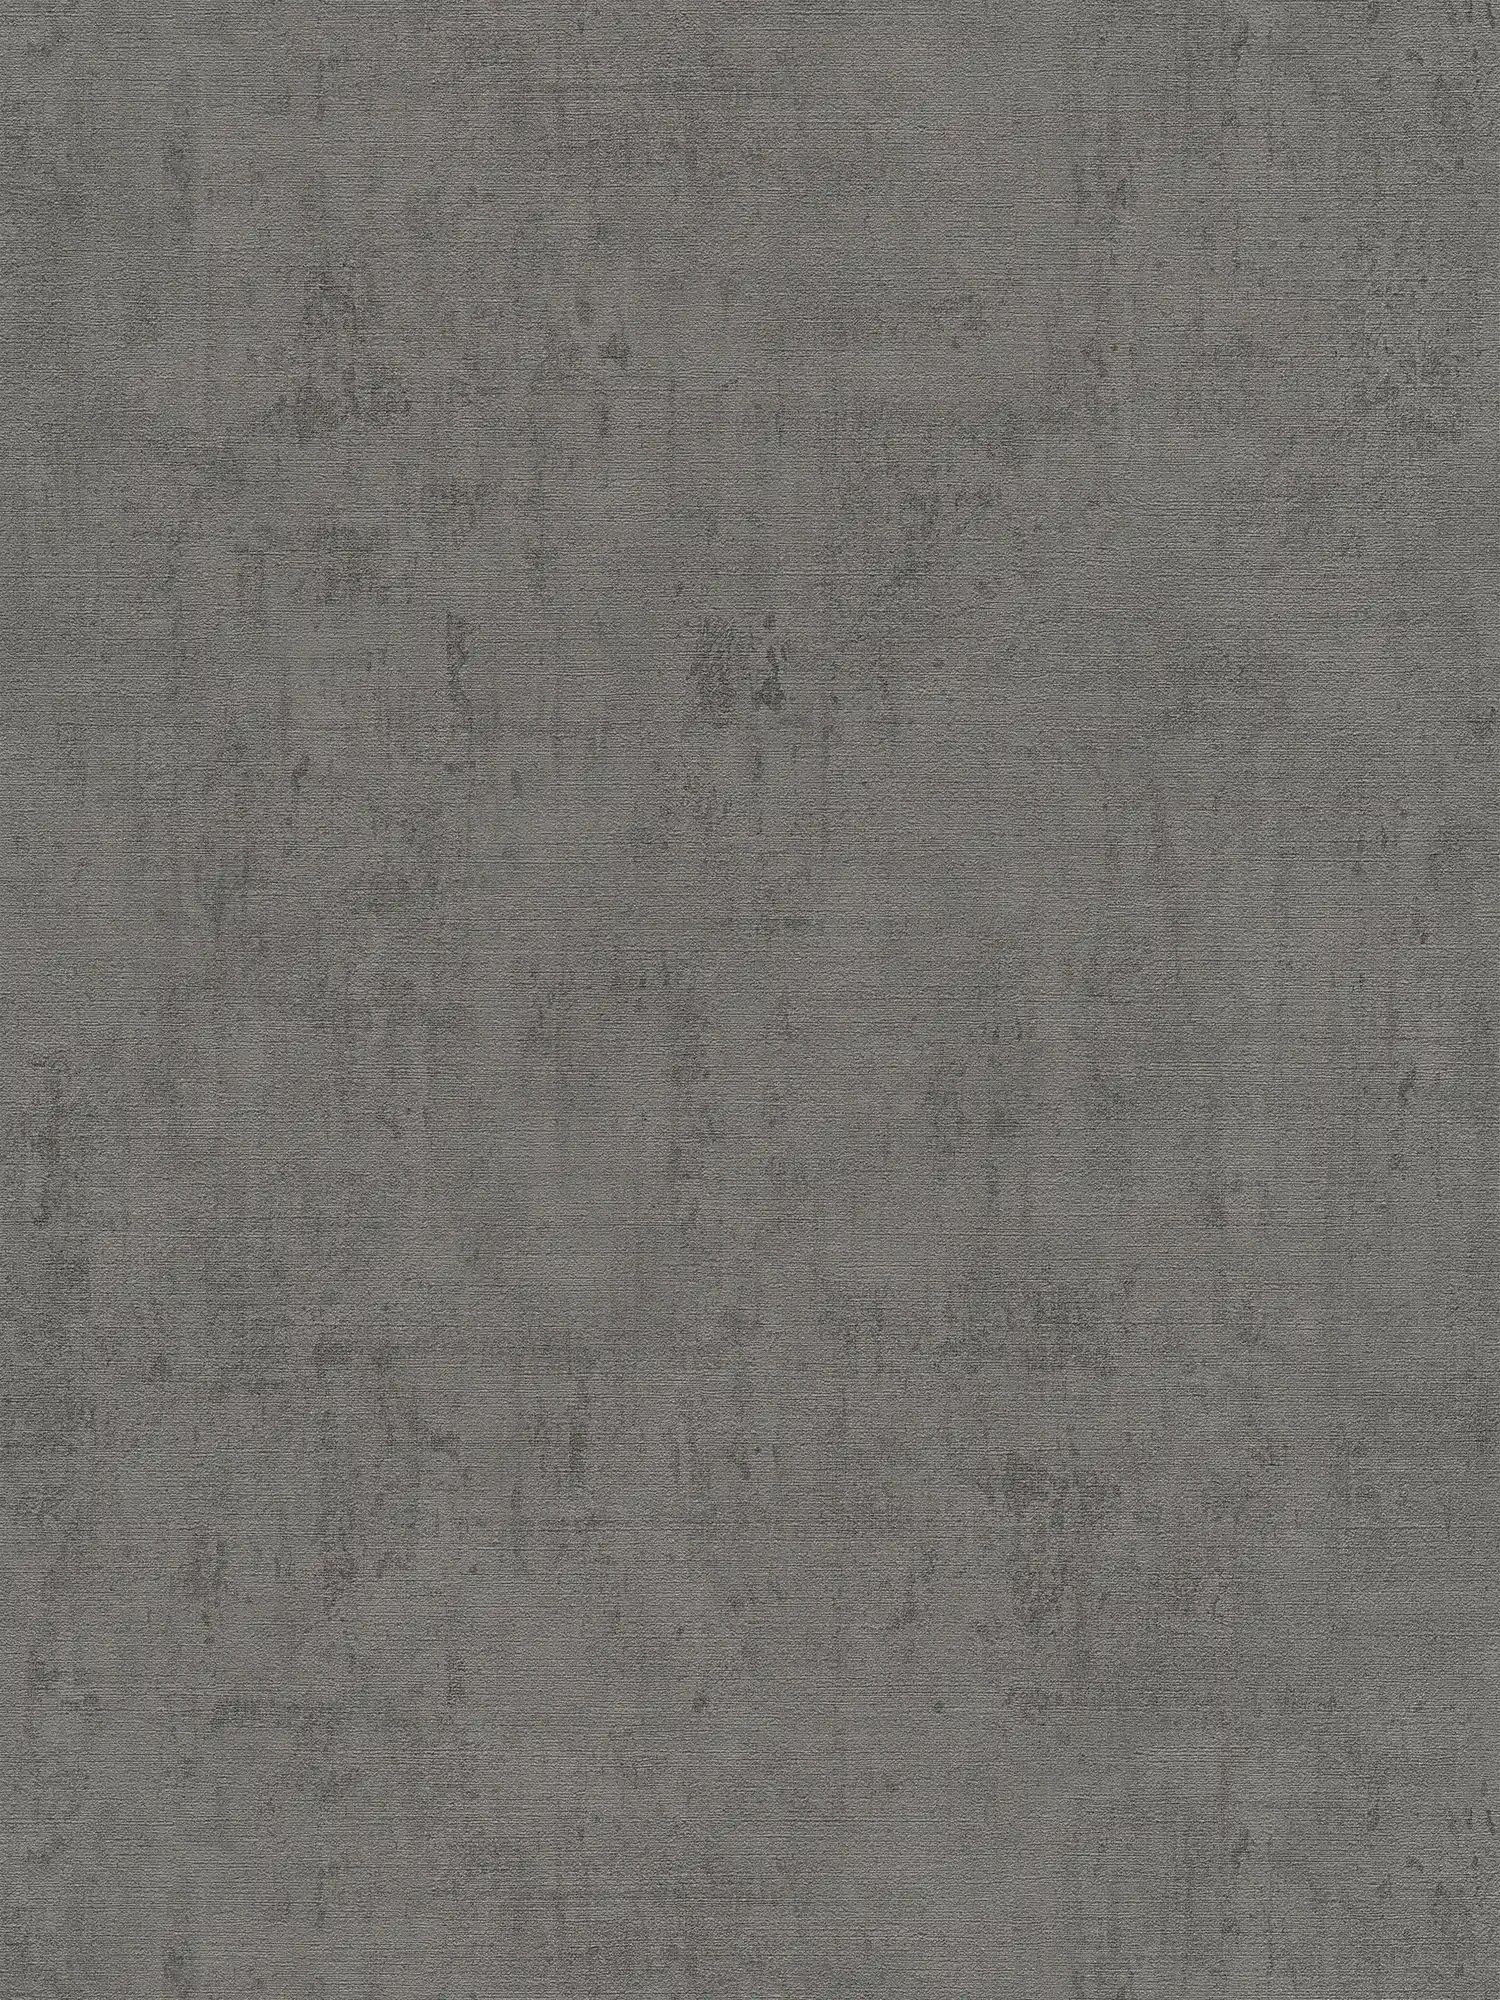 Wallpaper dark grey with plaster opics & embossed structure
